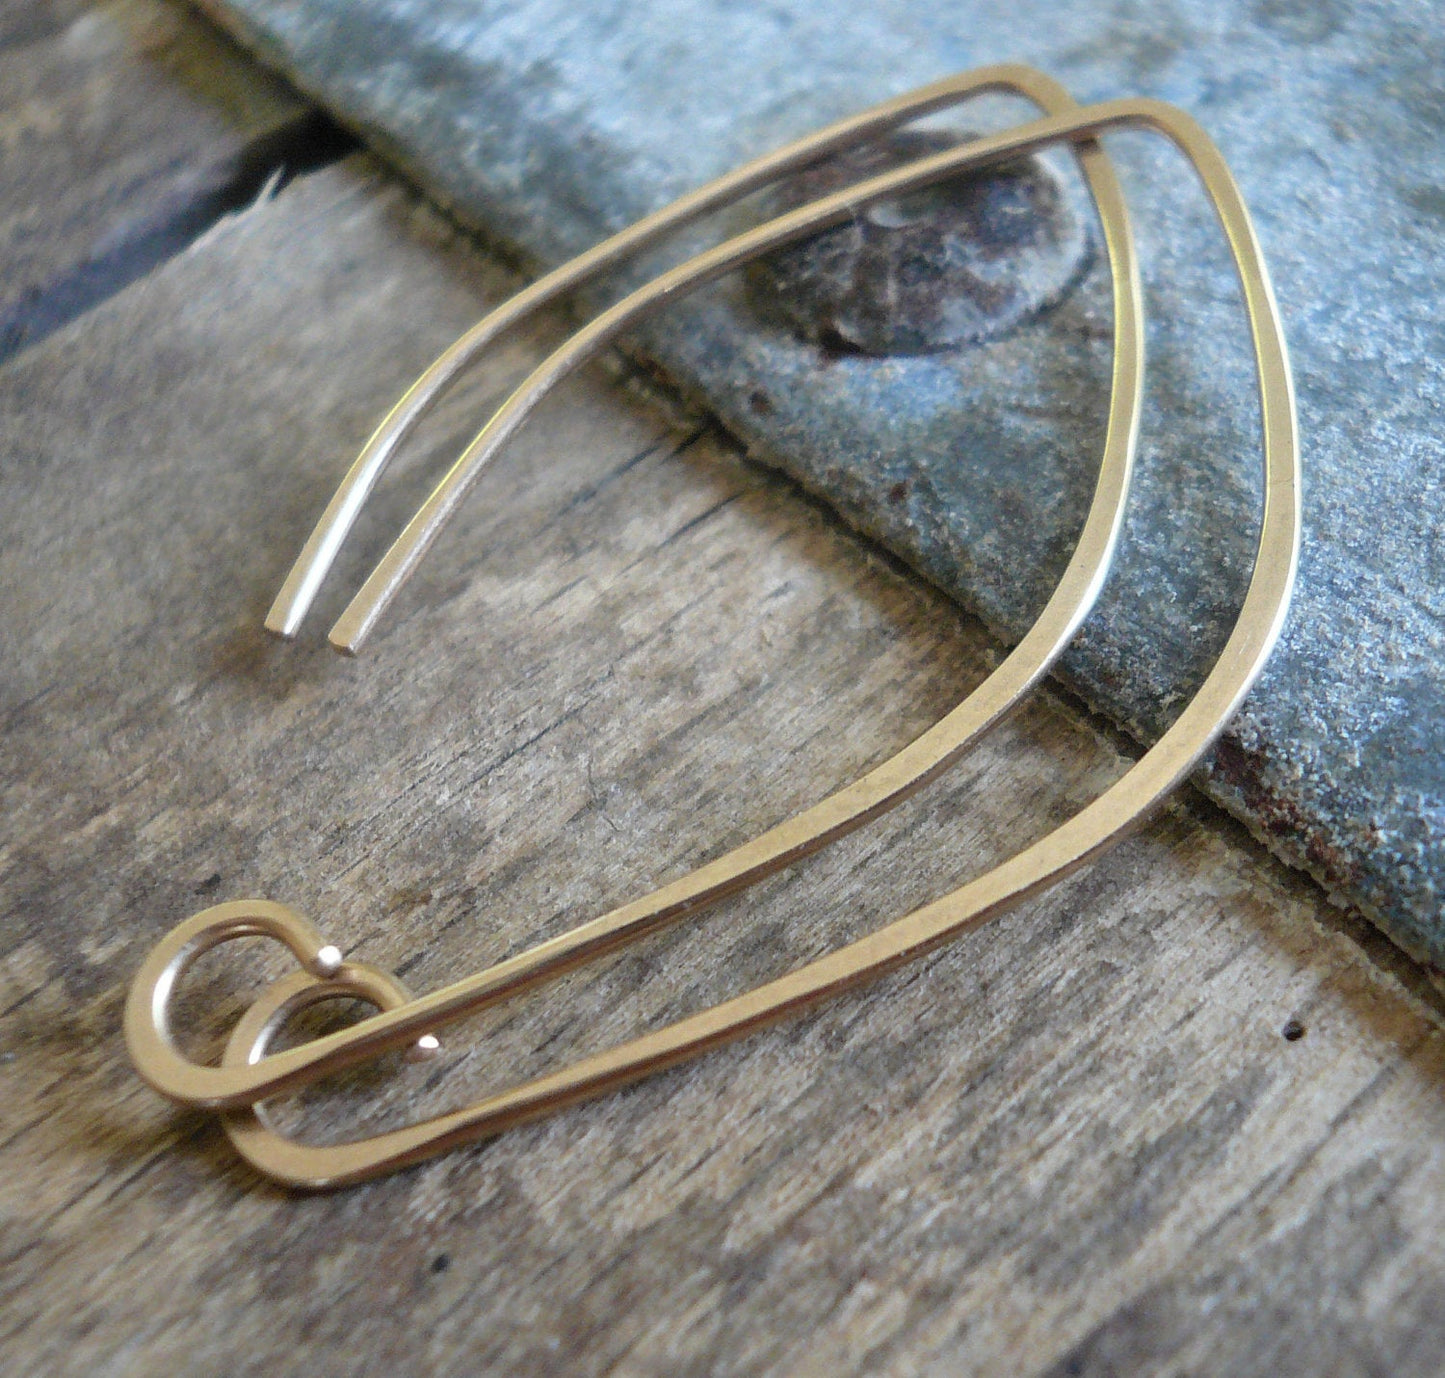 8 Pair Variety Pack 14kt Goldfill Earwires - Yellow or Rose Goldfill. Handmade. Handforged